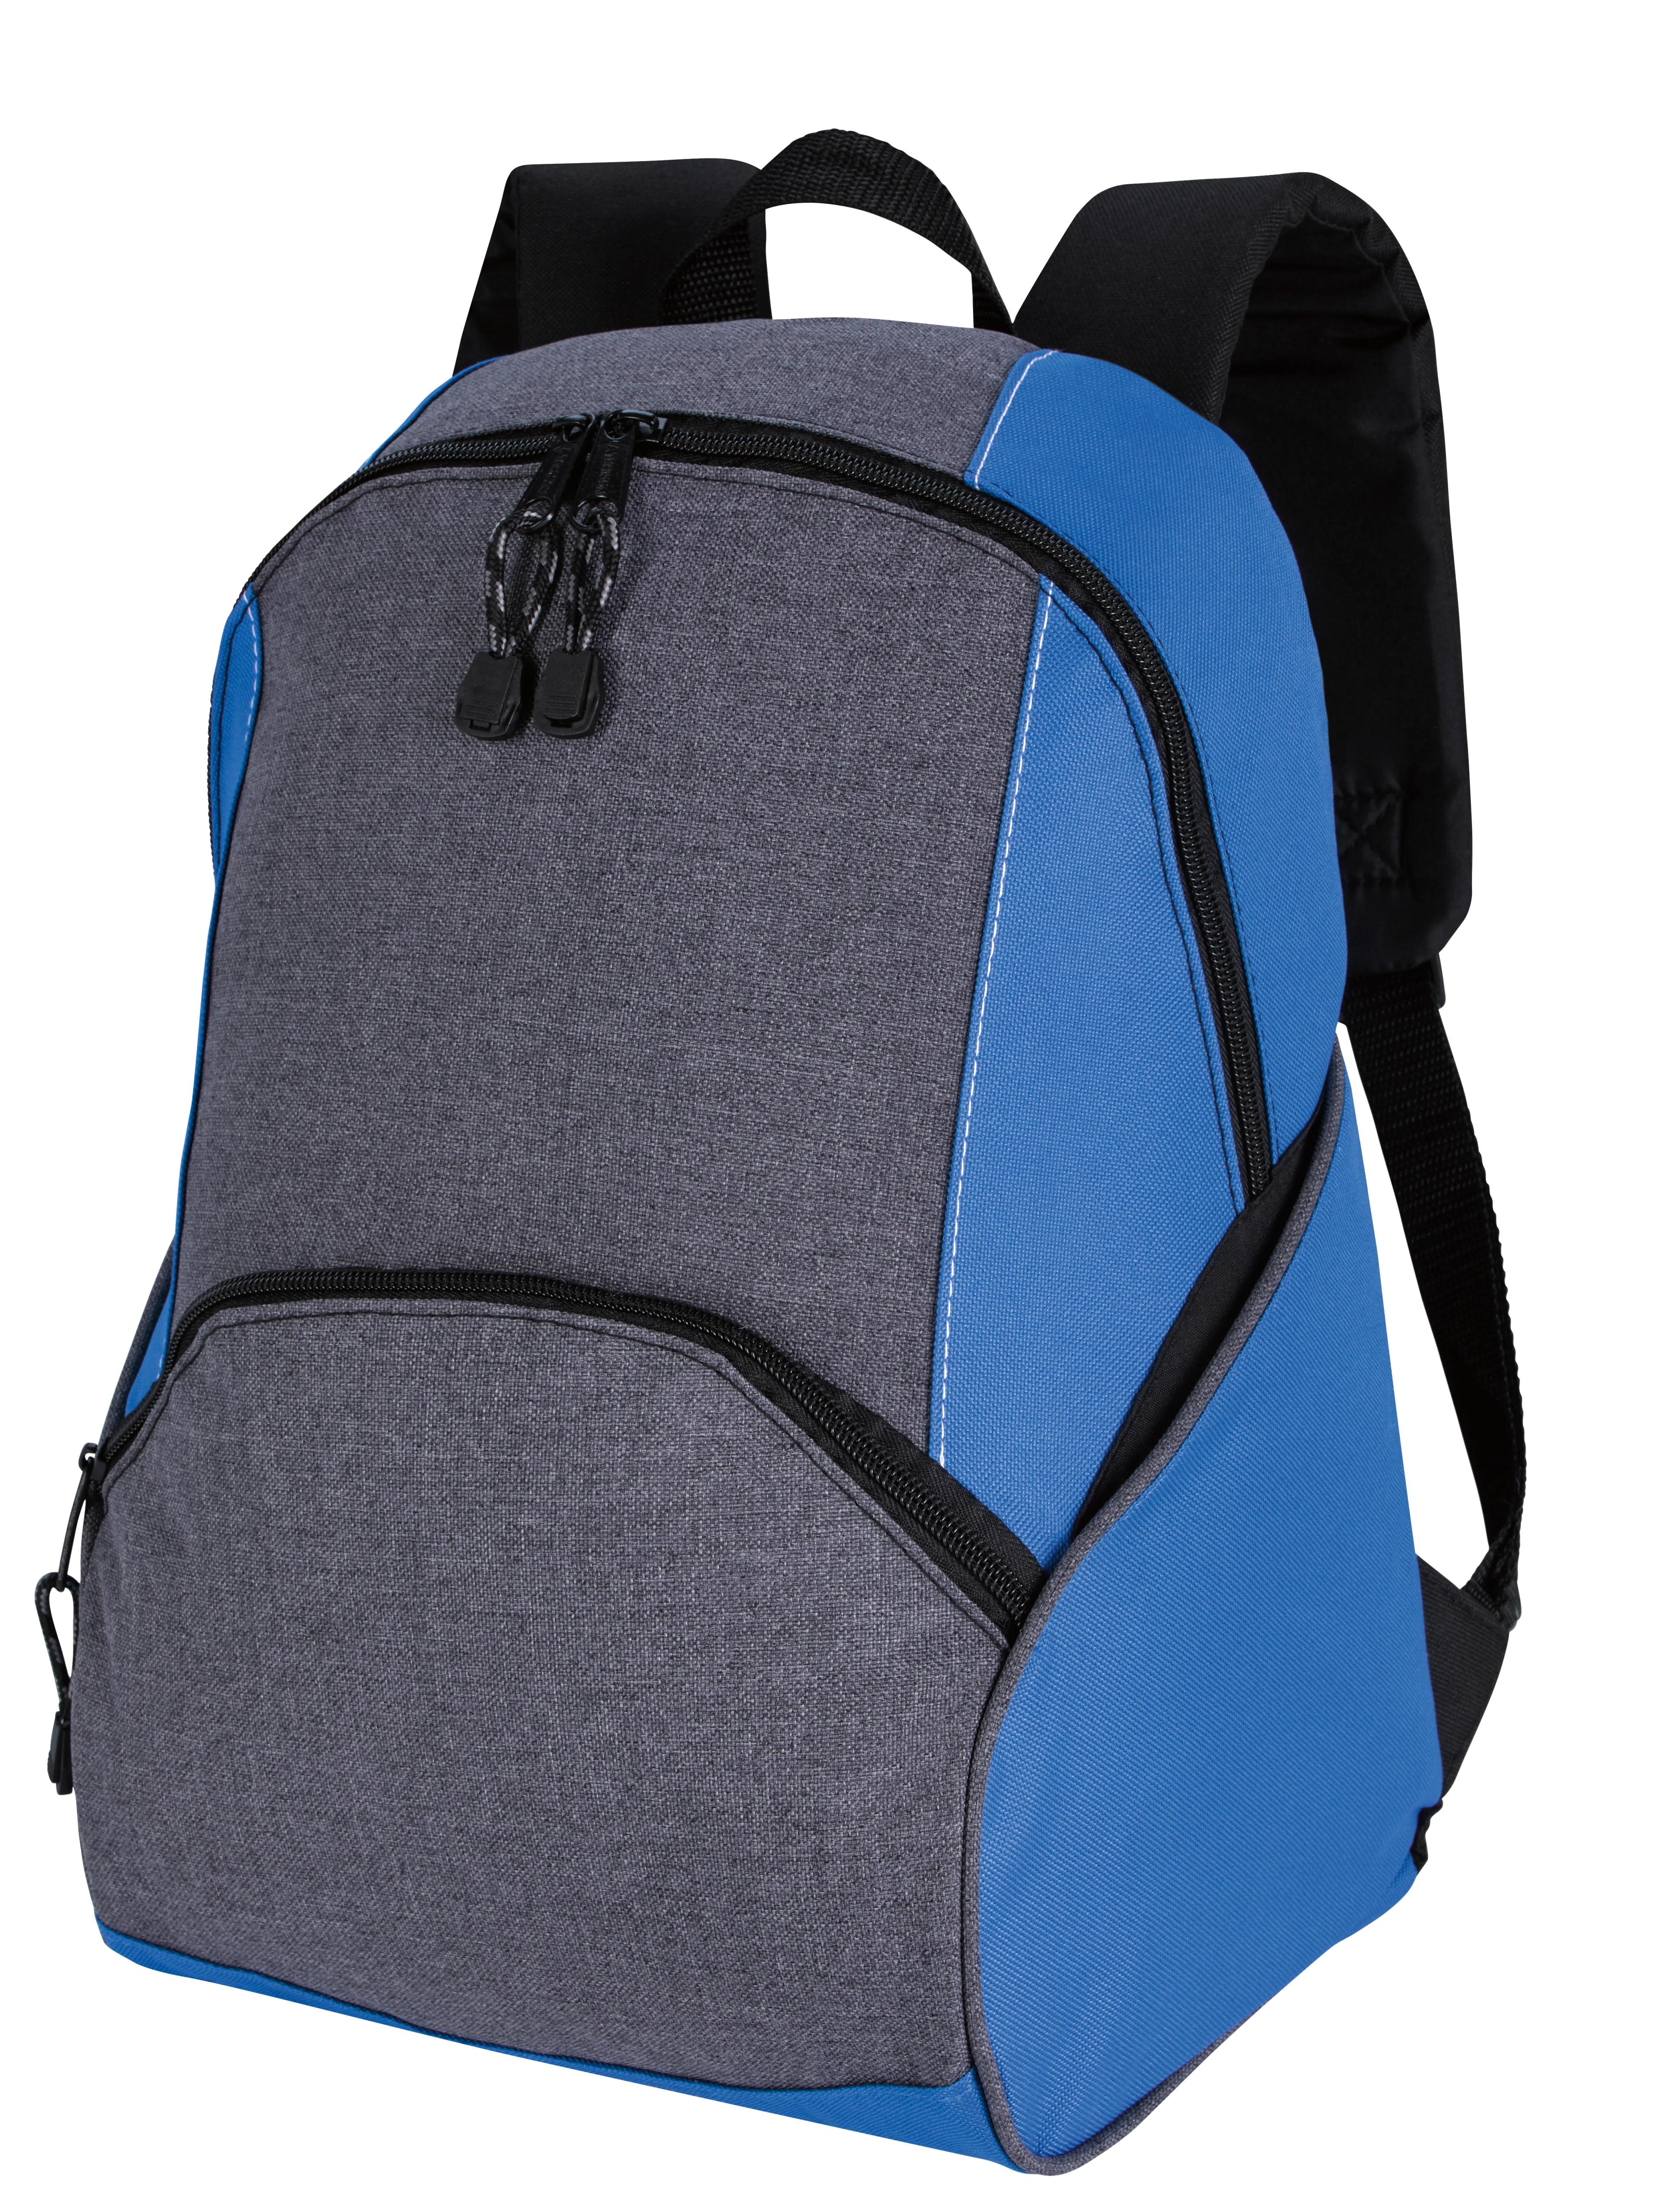 Two-Tone On the Move Backpack 7 of 25